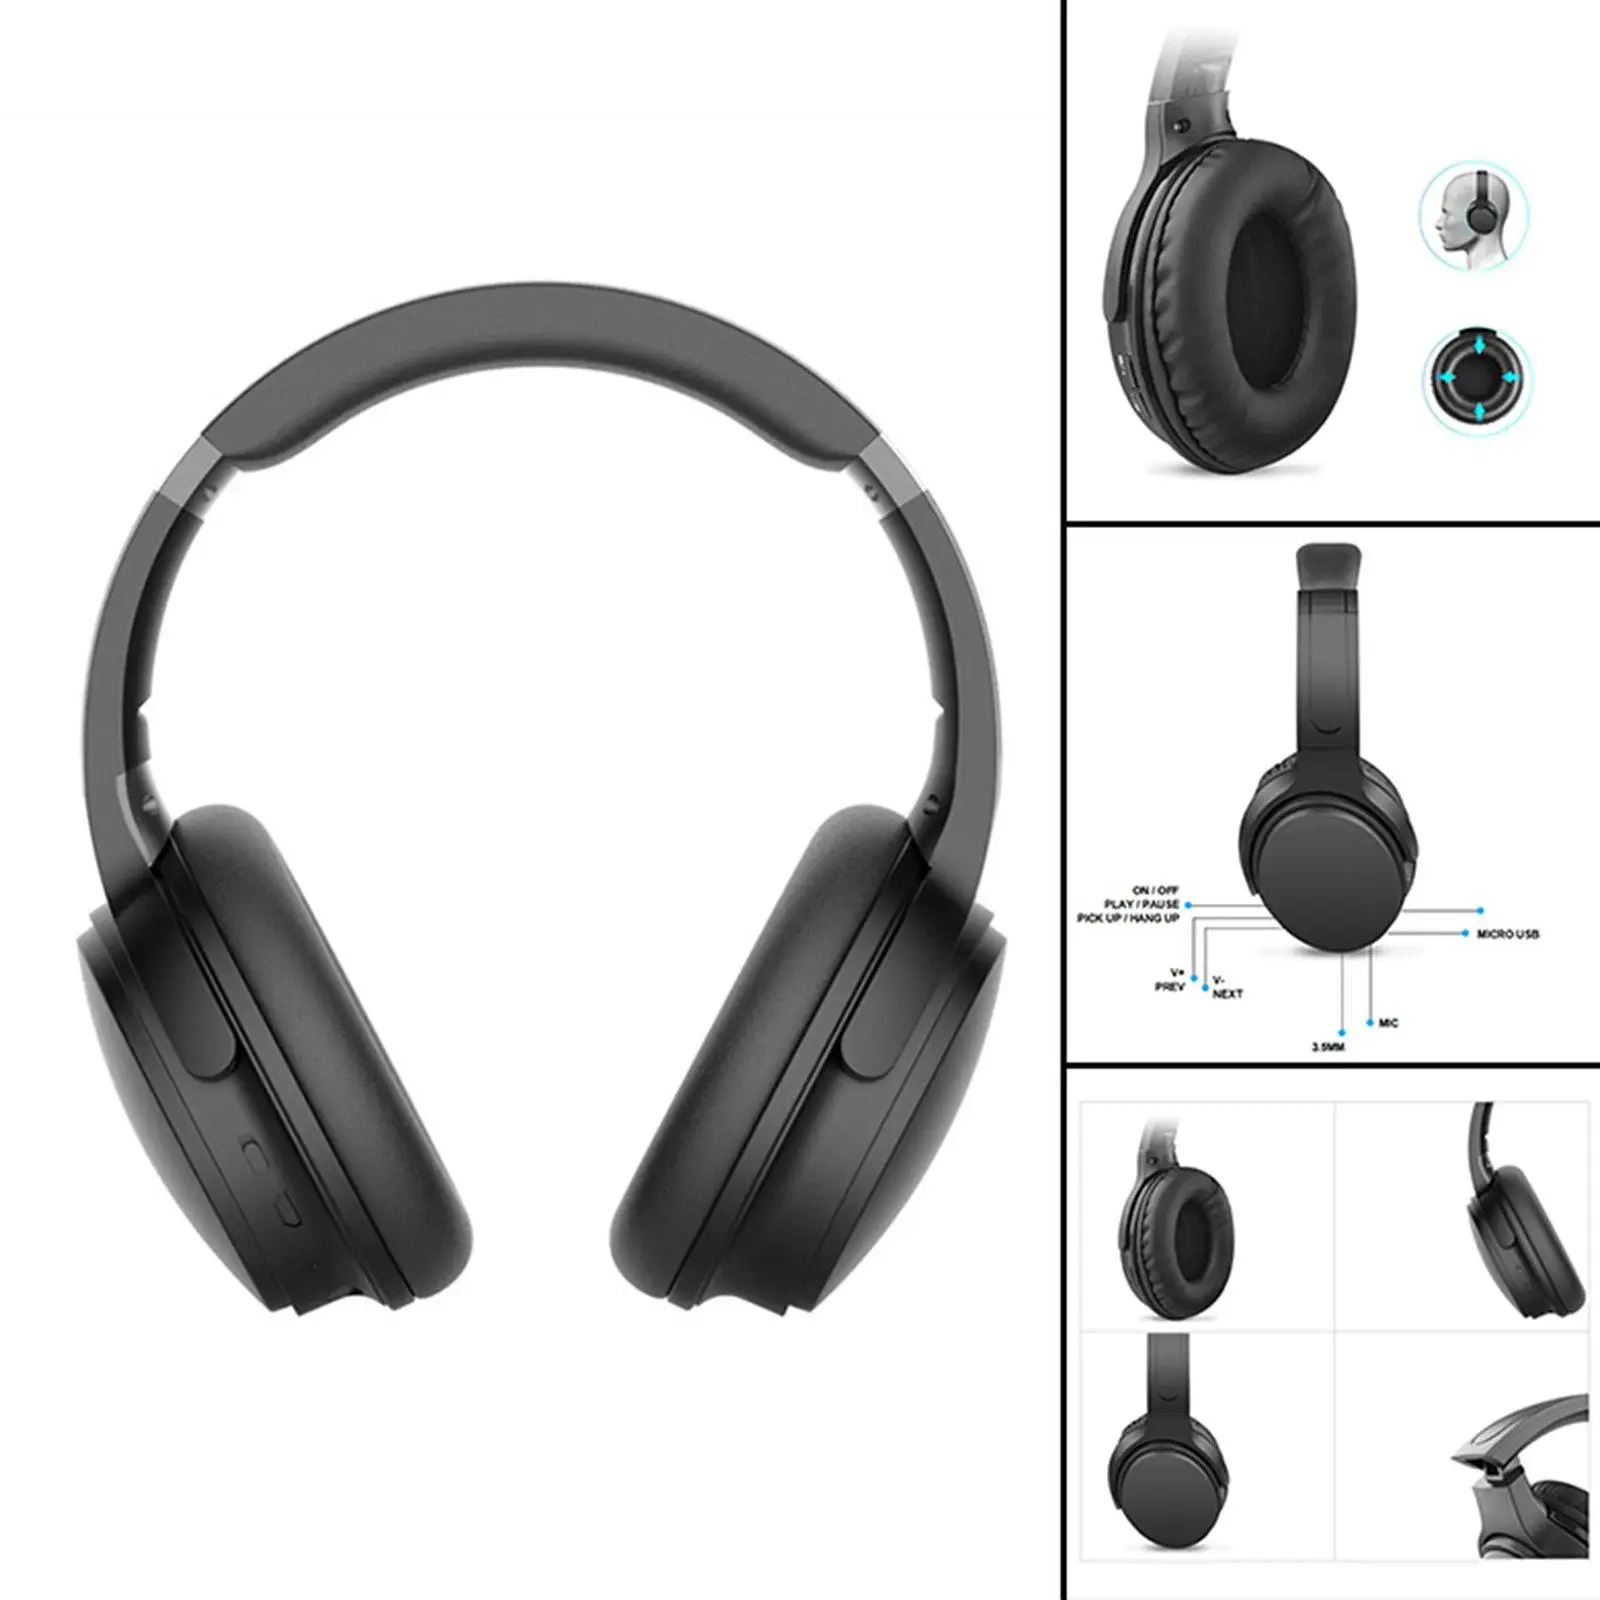  Headset Over Ear Noise Canceling(ANC) Headphones for s Music PC 